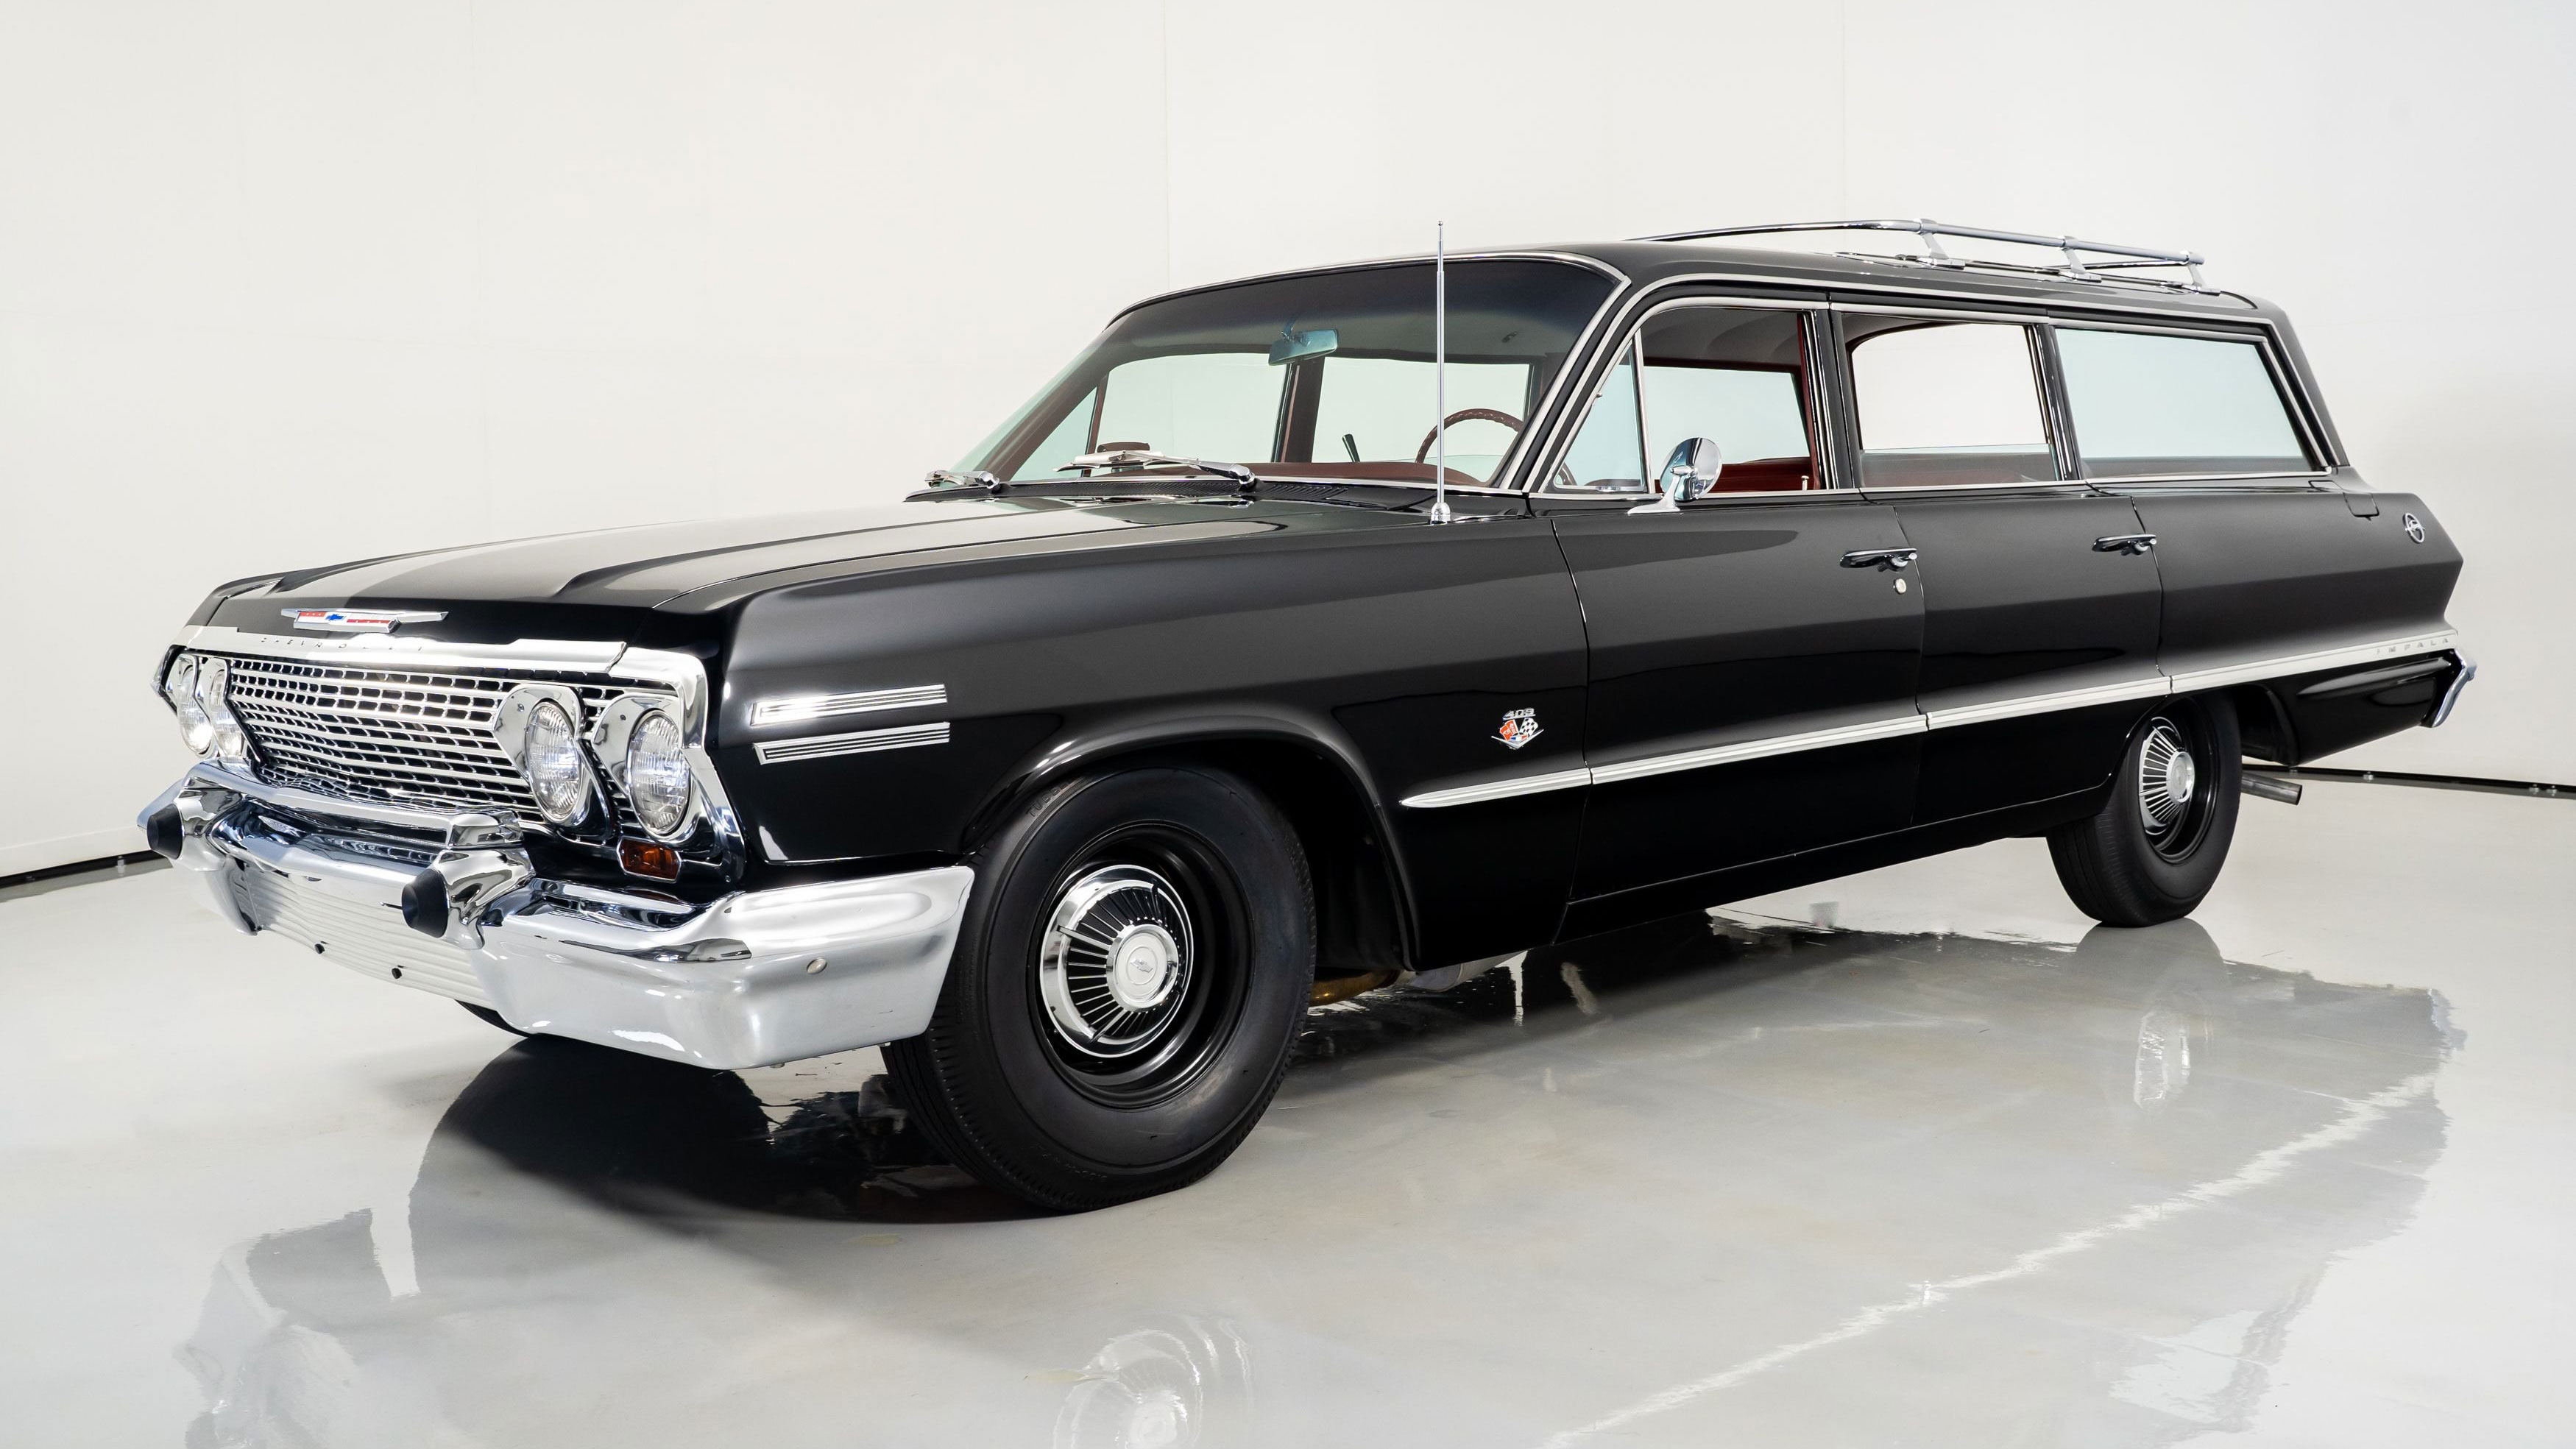 Rare 409-Powered 1963 Chevy Impala Wagon For Sale: Video